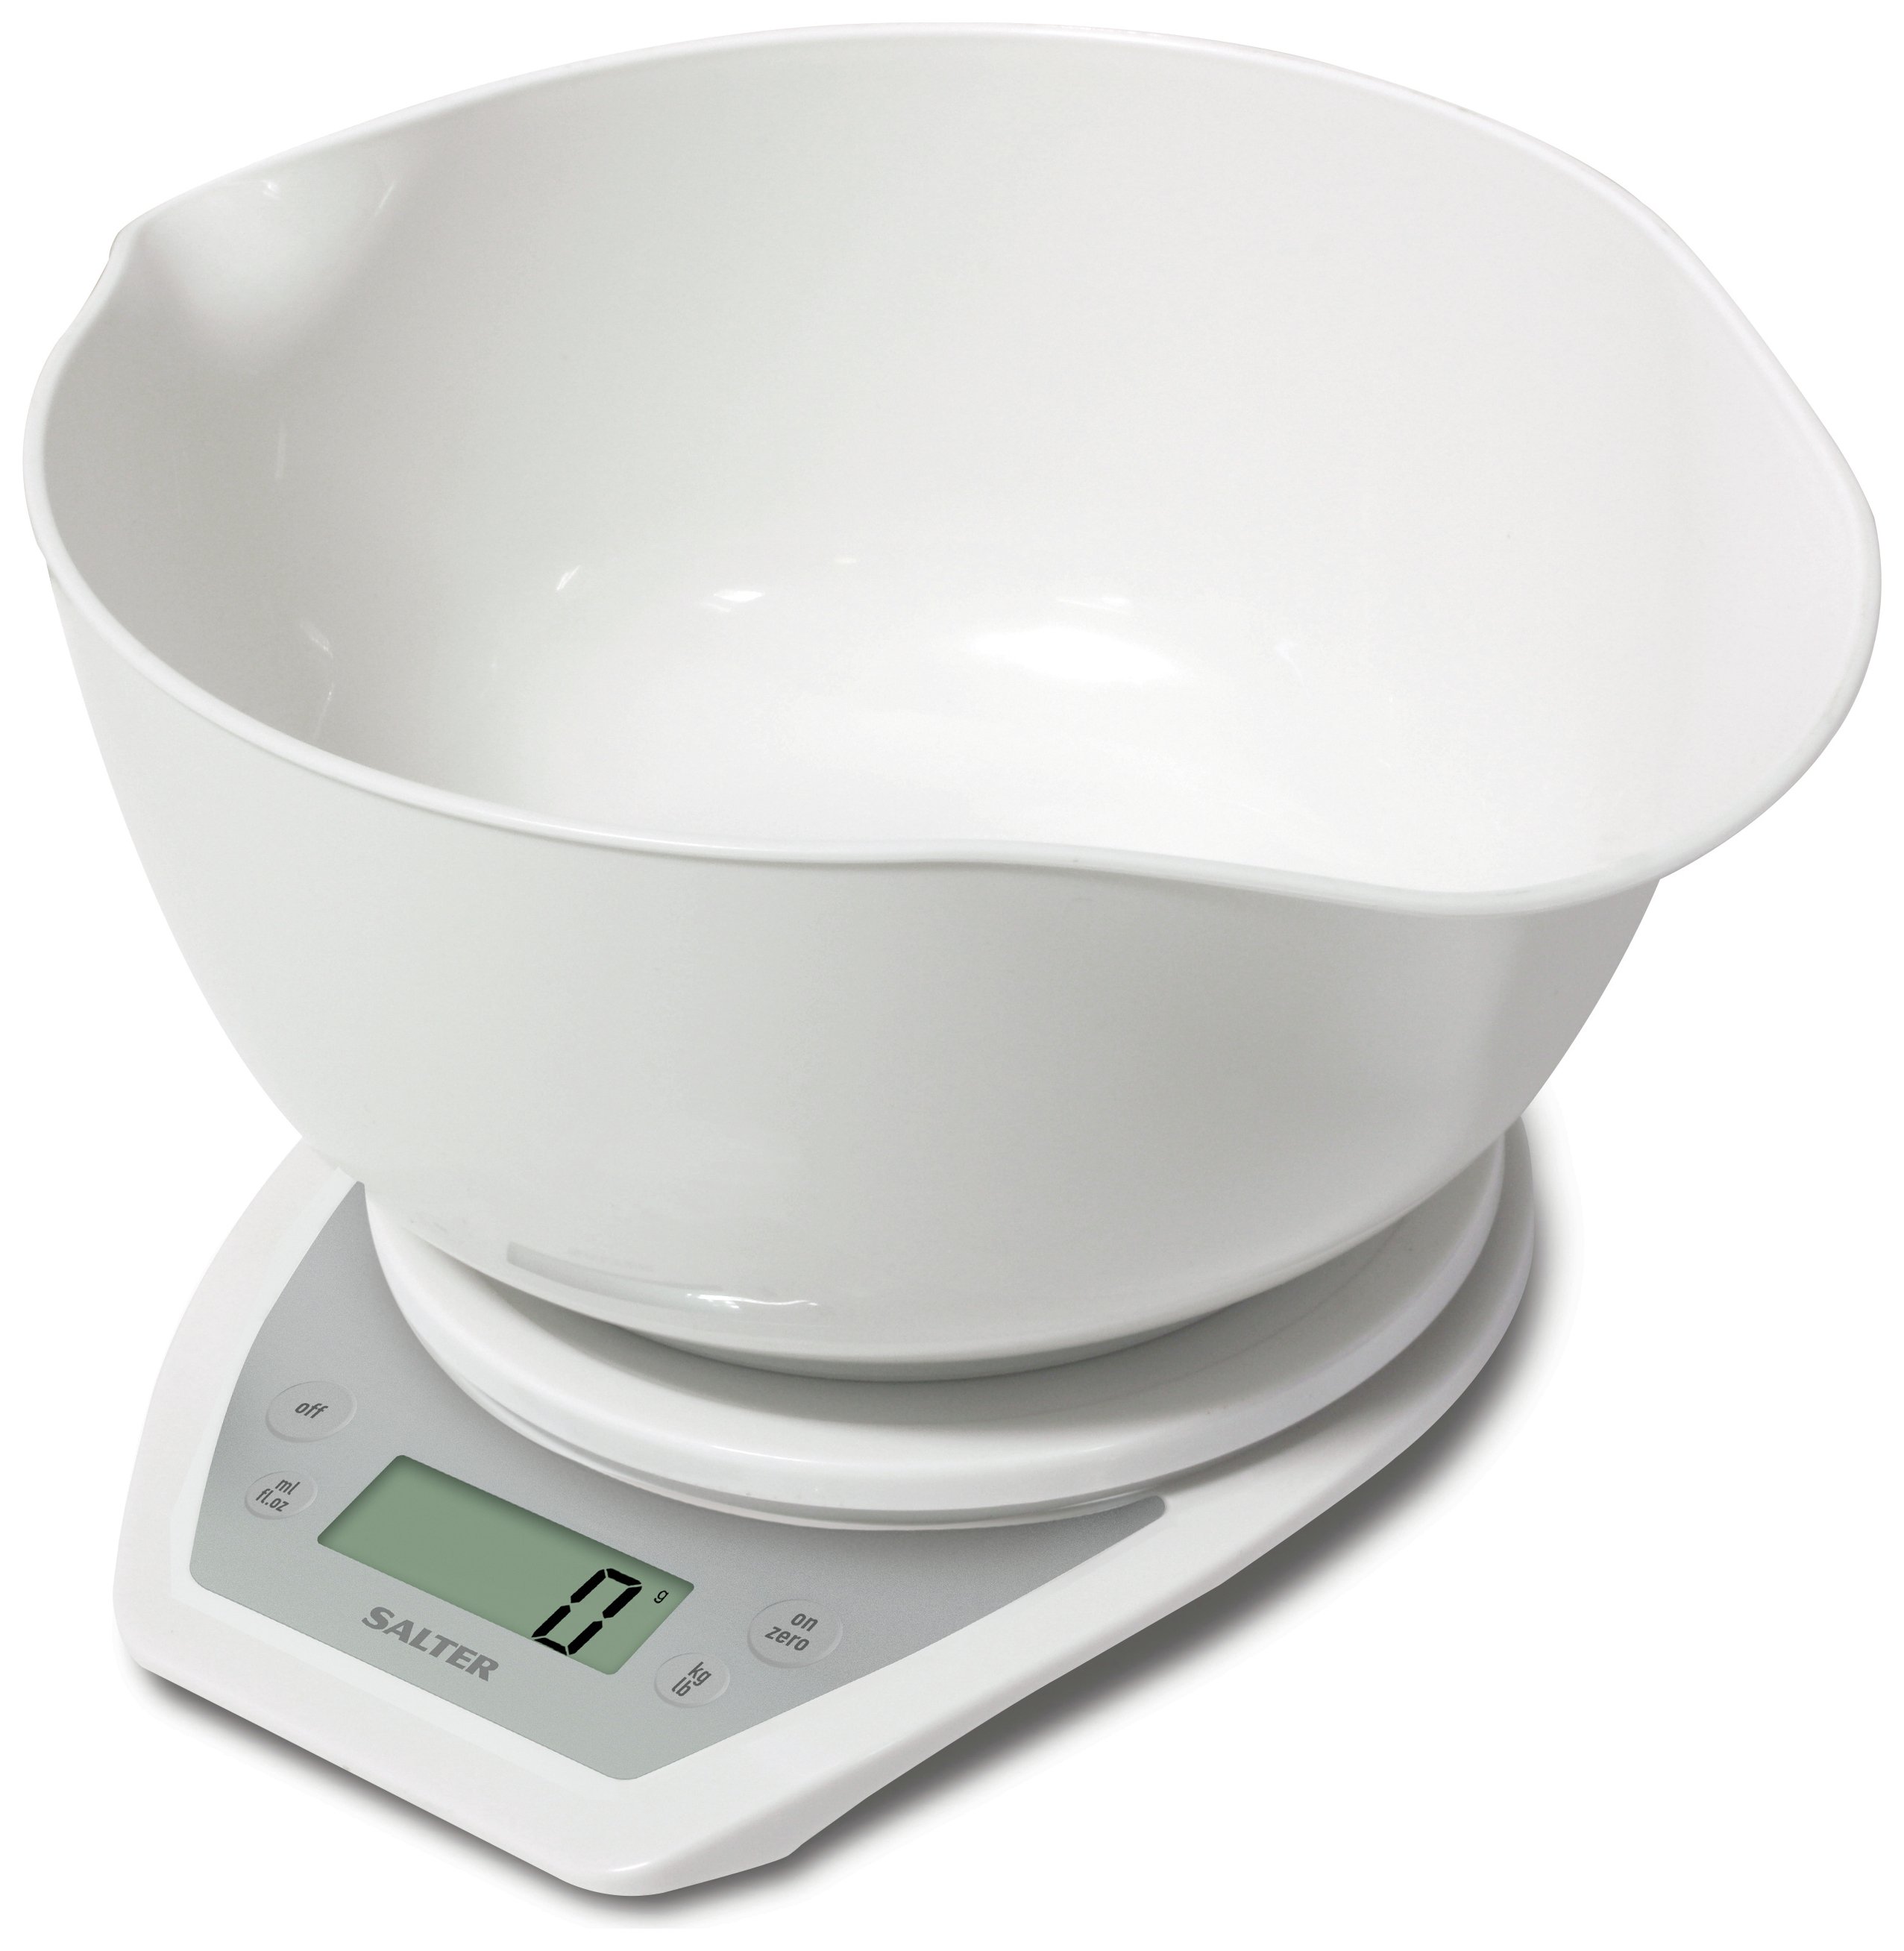 Salter Aquatronic Kitchen Scale and Bowl - White.